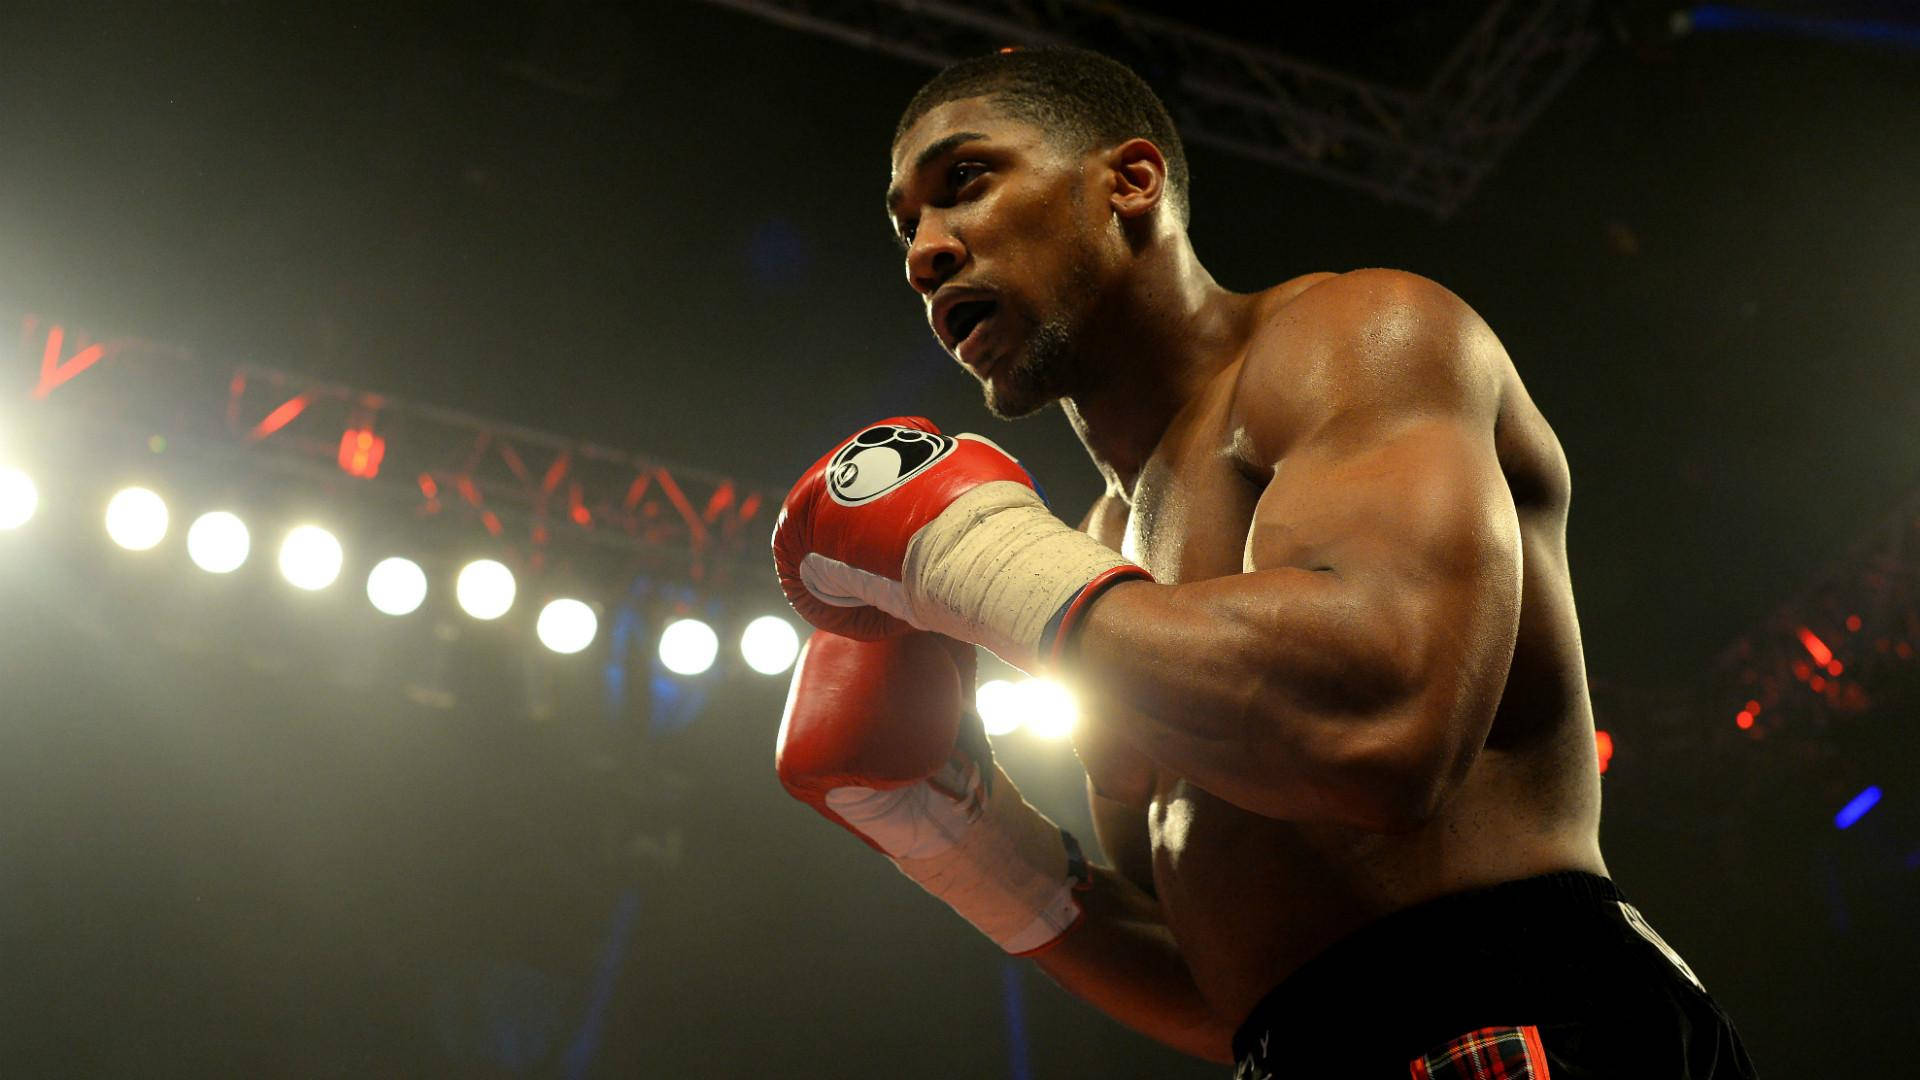 Anthony Joshua Red Gloves Together Wallpaper